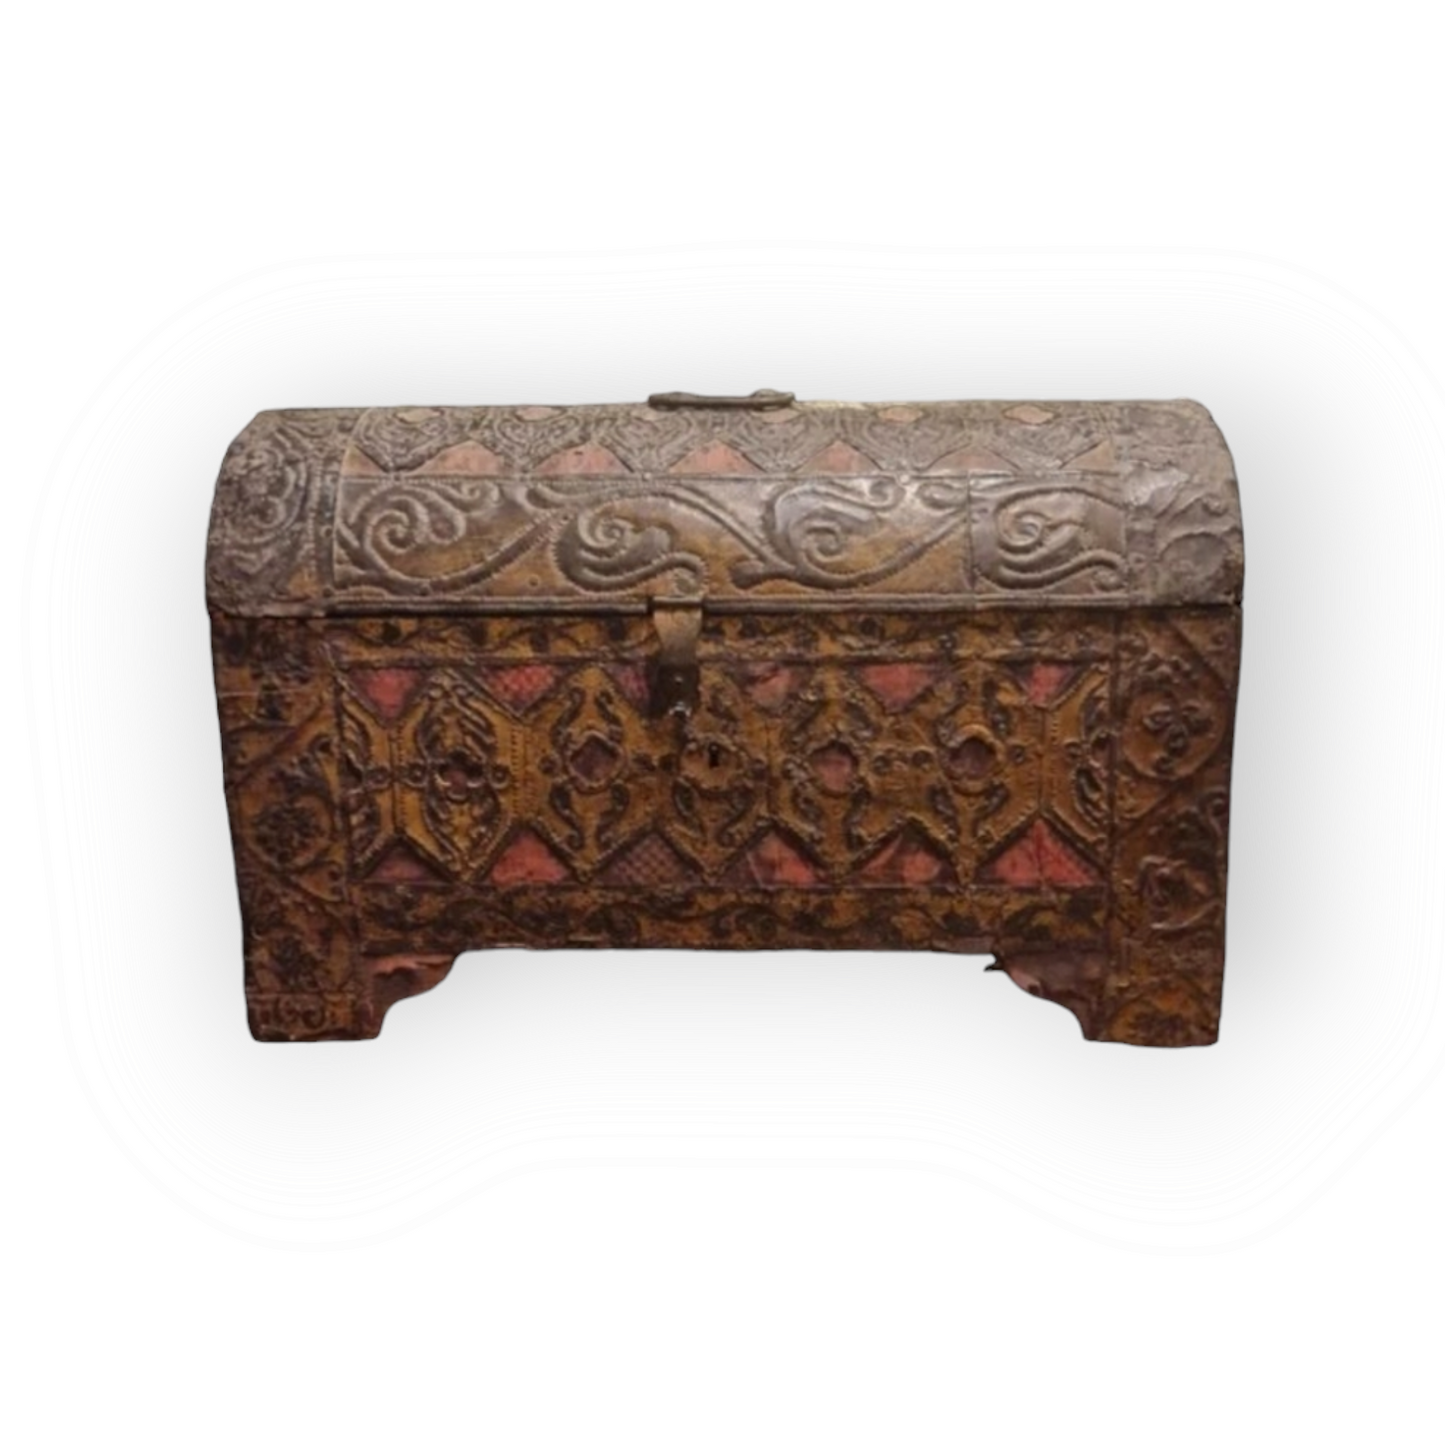 Mid-17th Century Iberian Antique Repousee-Worked Sheet Iron And Velvet Covered Table Casket / Table Top Box, Circa 1650